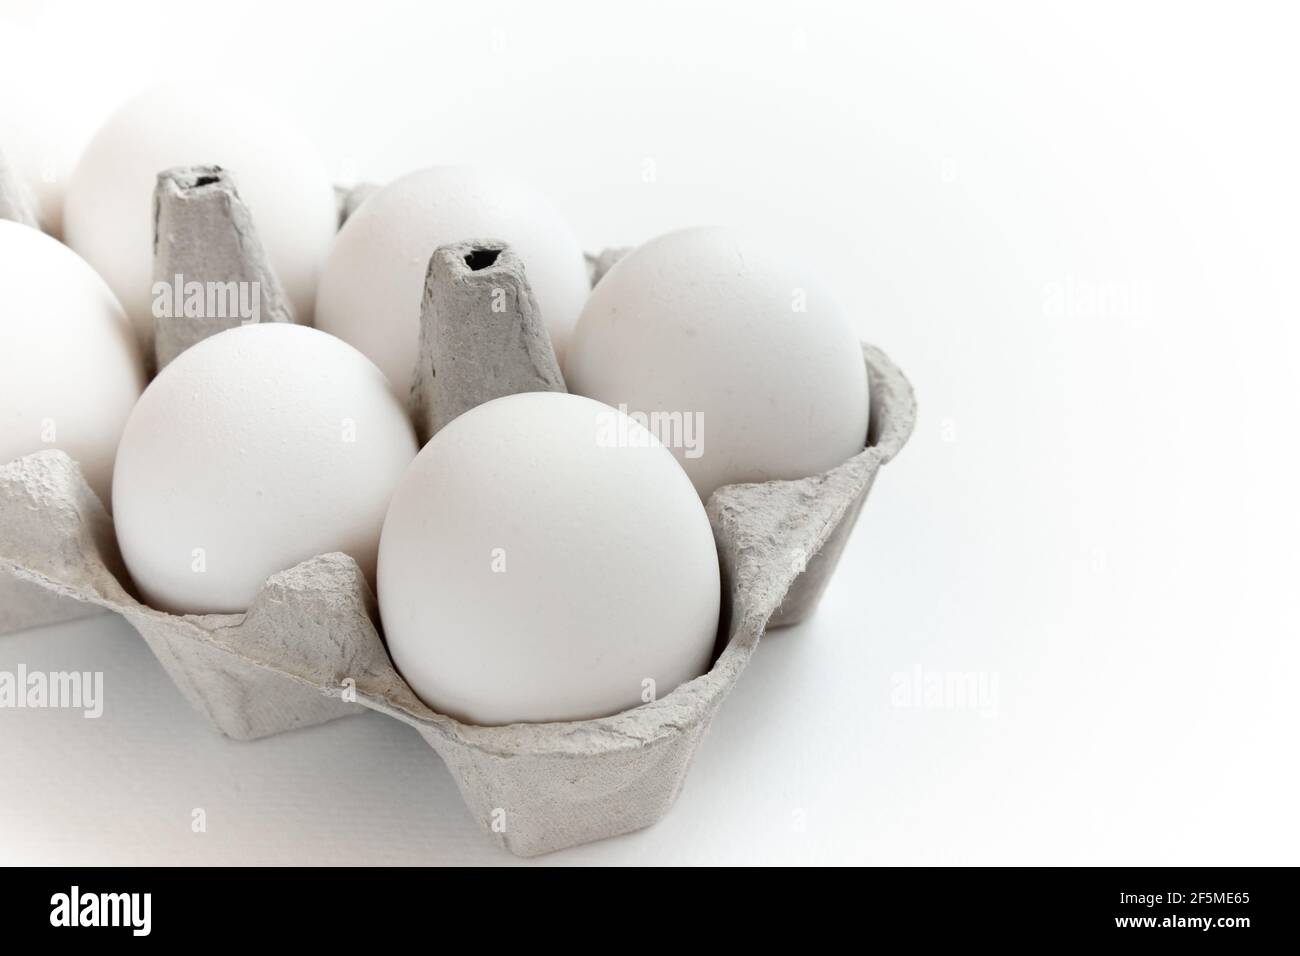 Fresh ginger eggs packed in a gray ecological paper container on a white background. Stock Photo